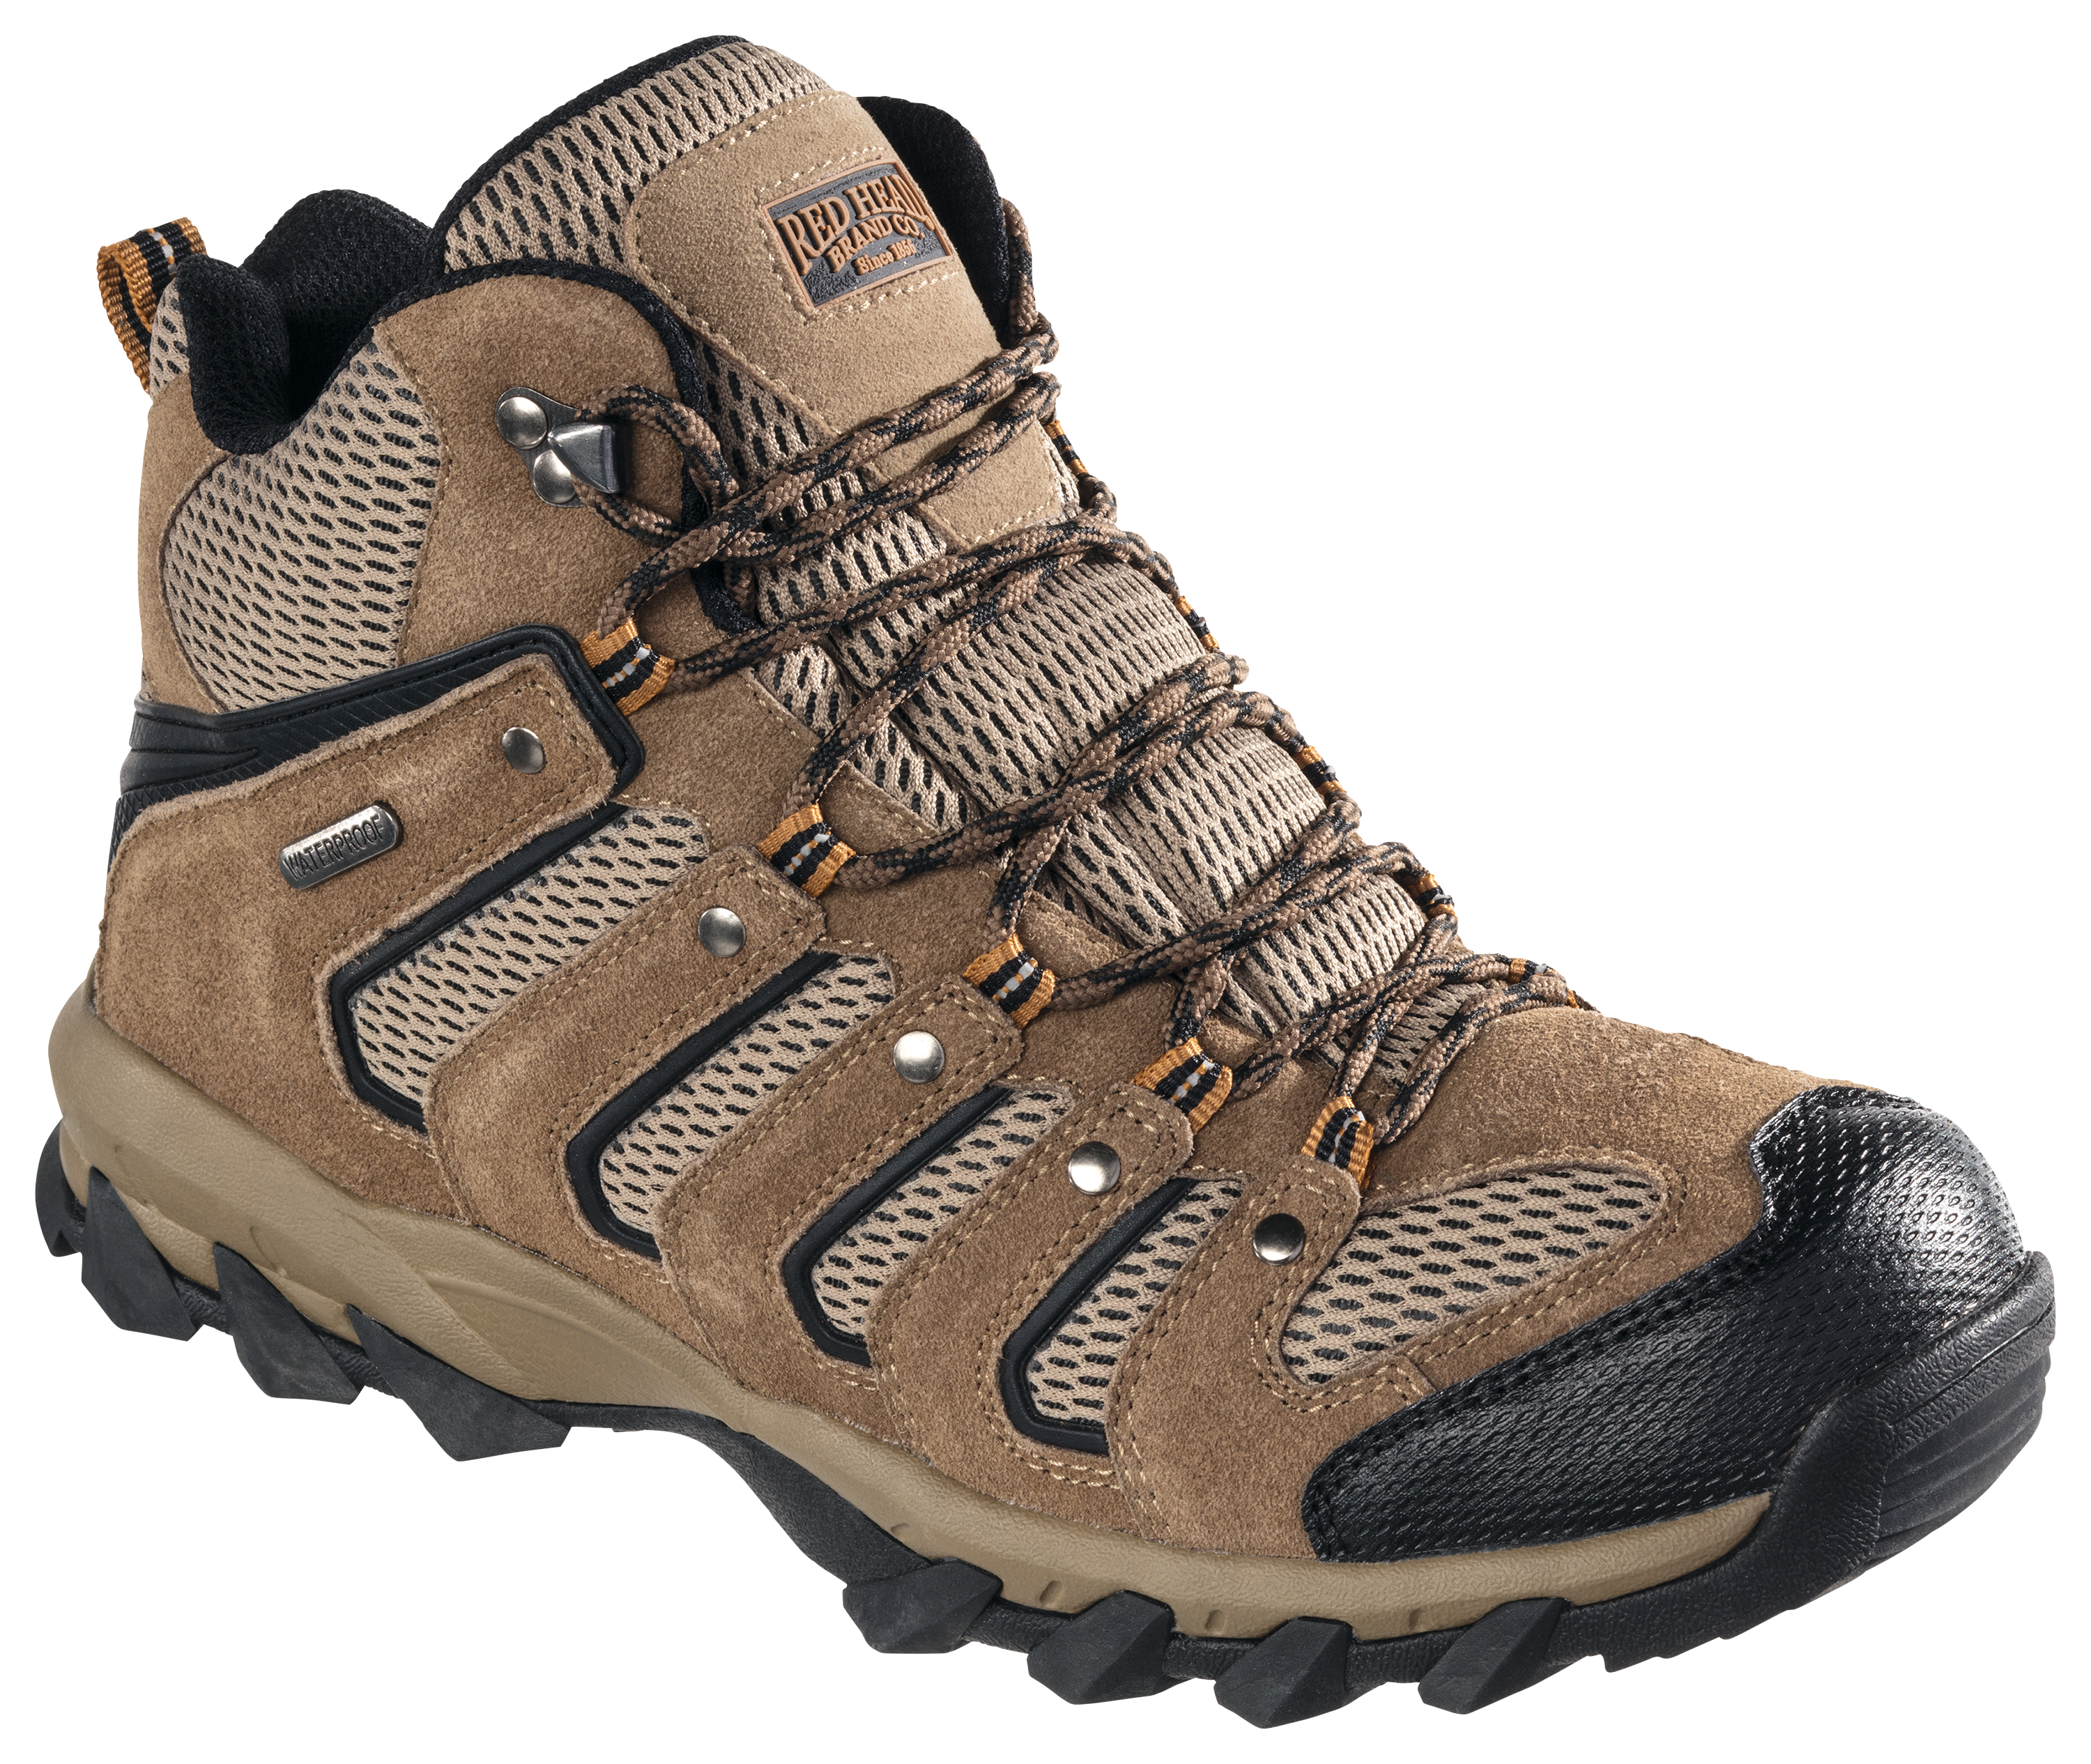 RedHead Front Range Hiking Boots for Men - Brown - 10M